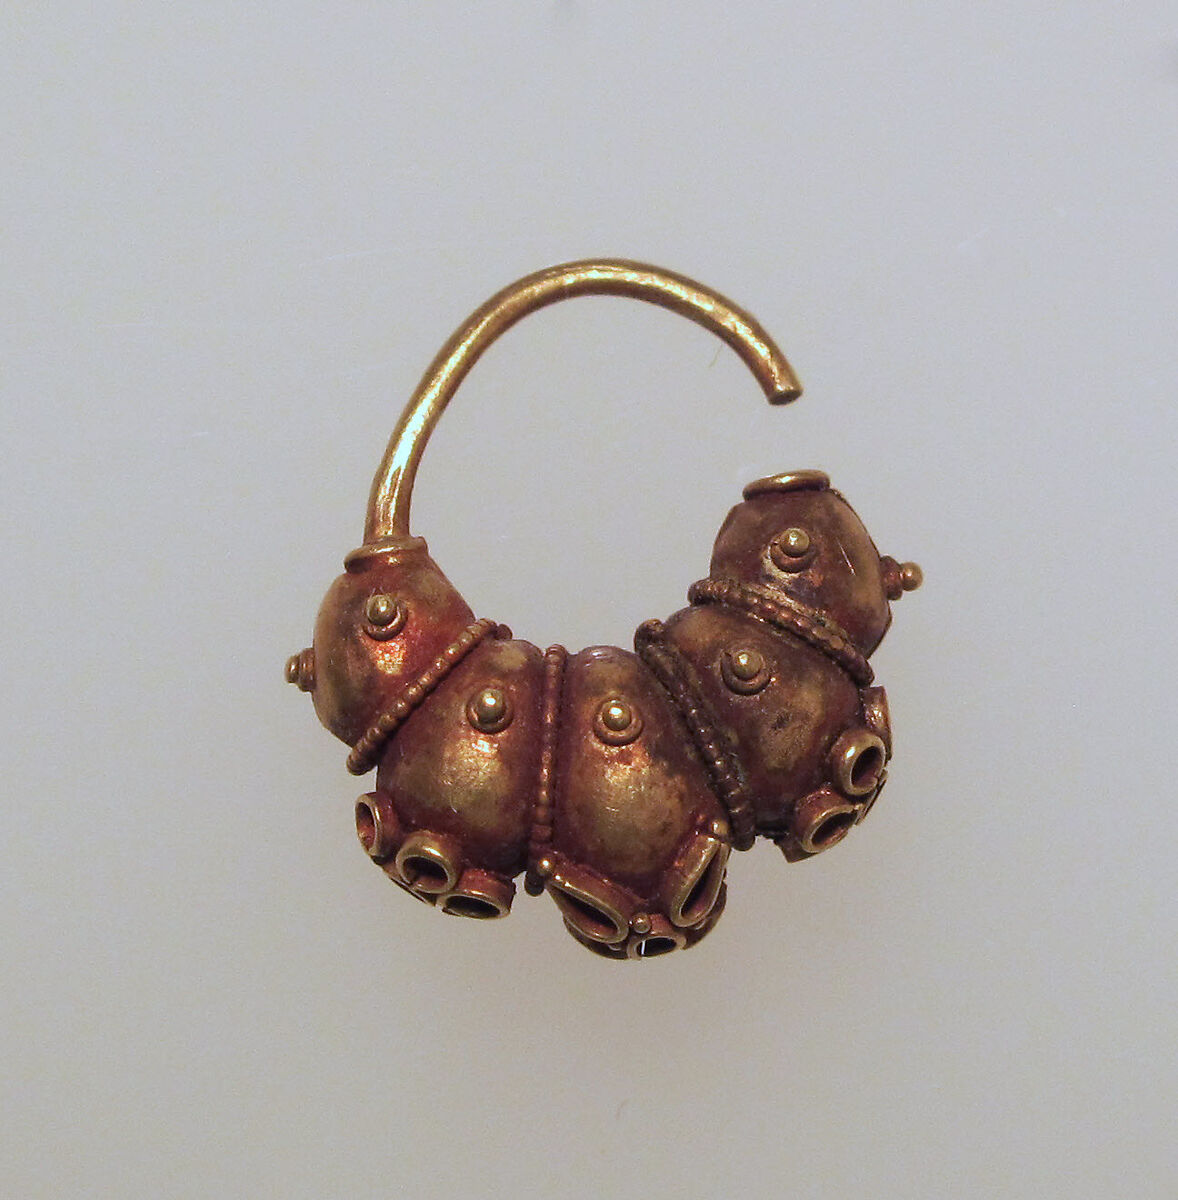 Electrum earring with lobes and rosettes, Electrum, Cypriot 